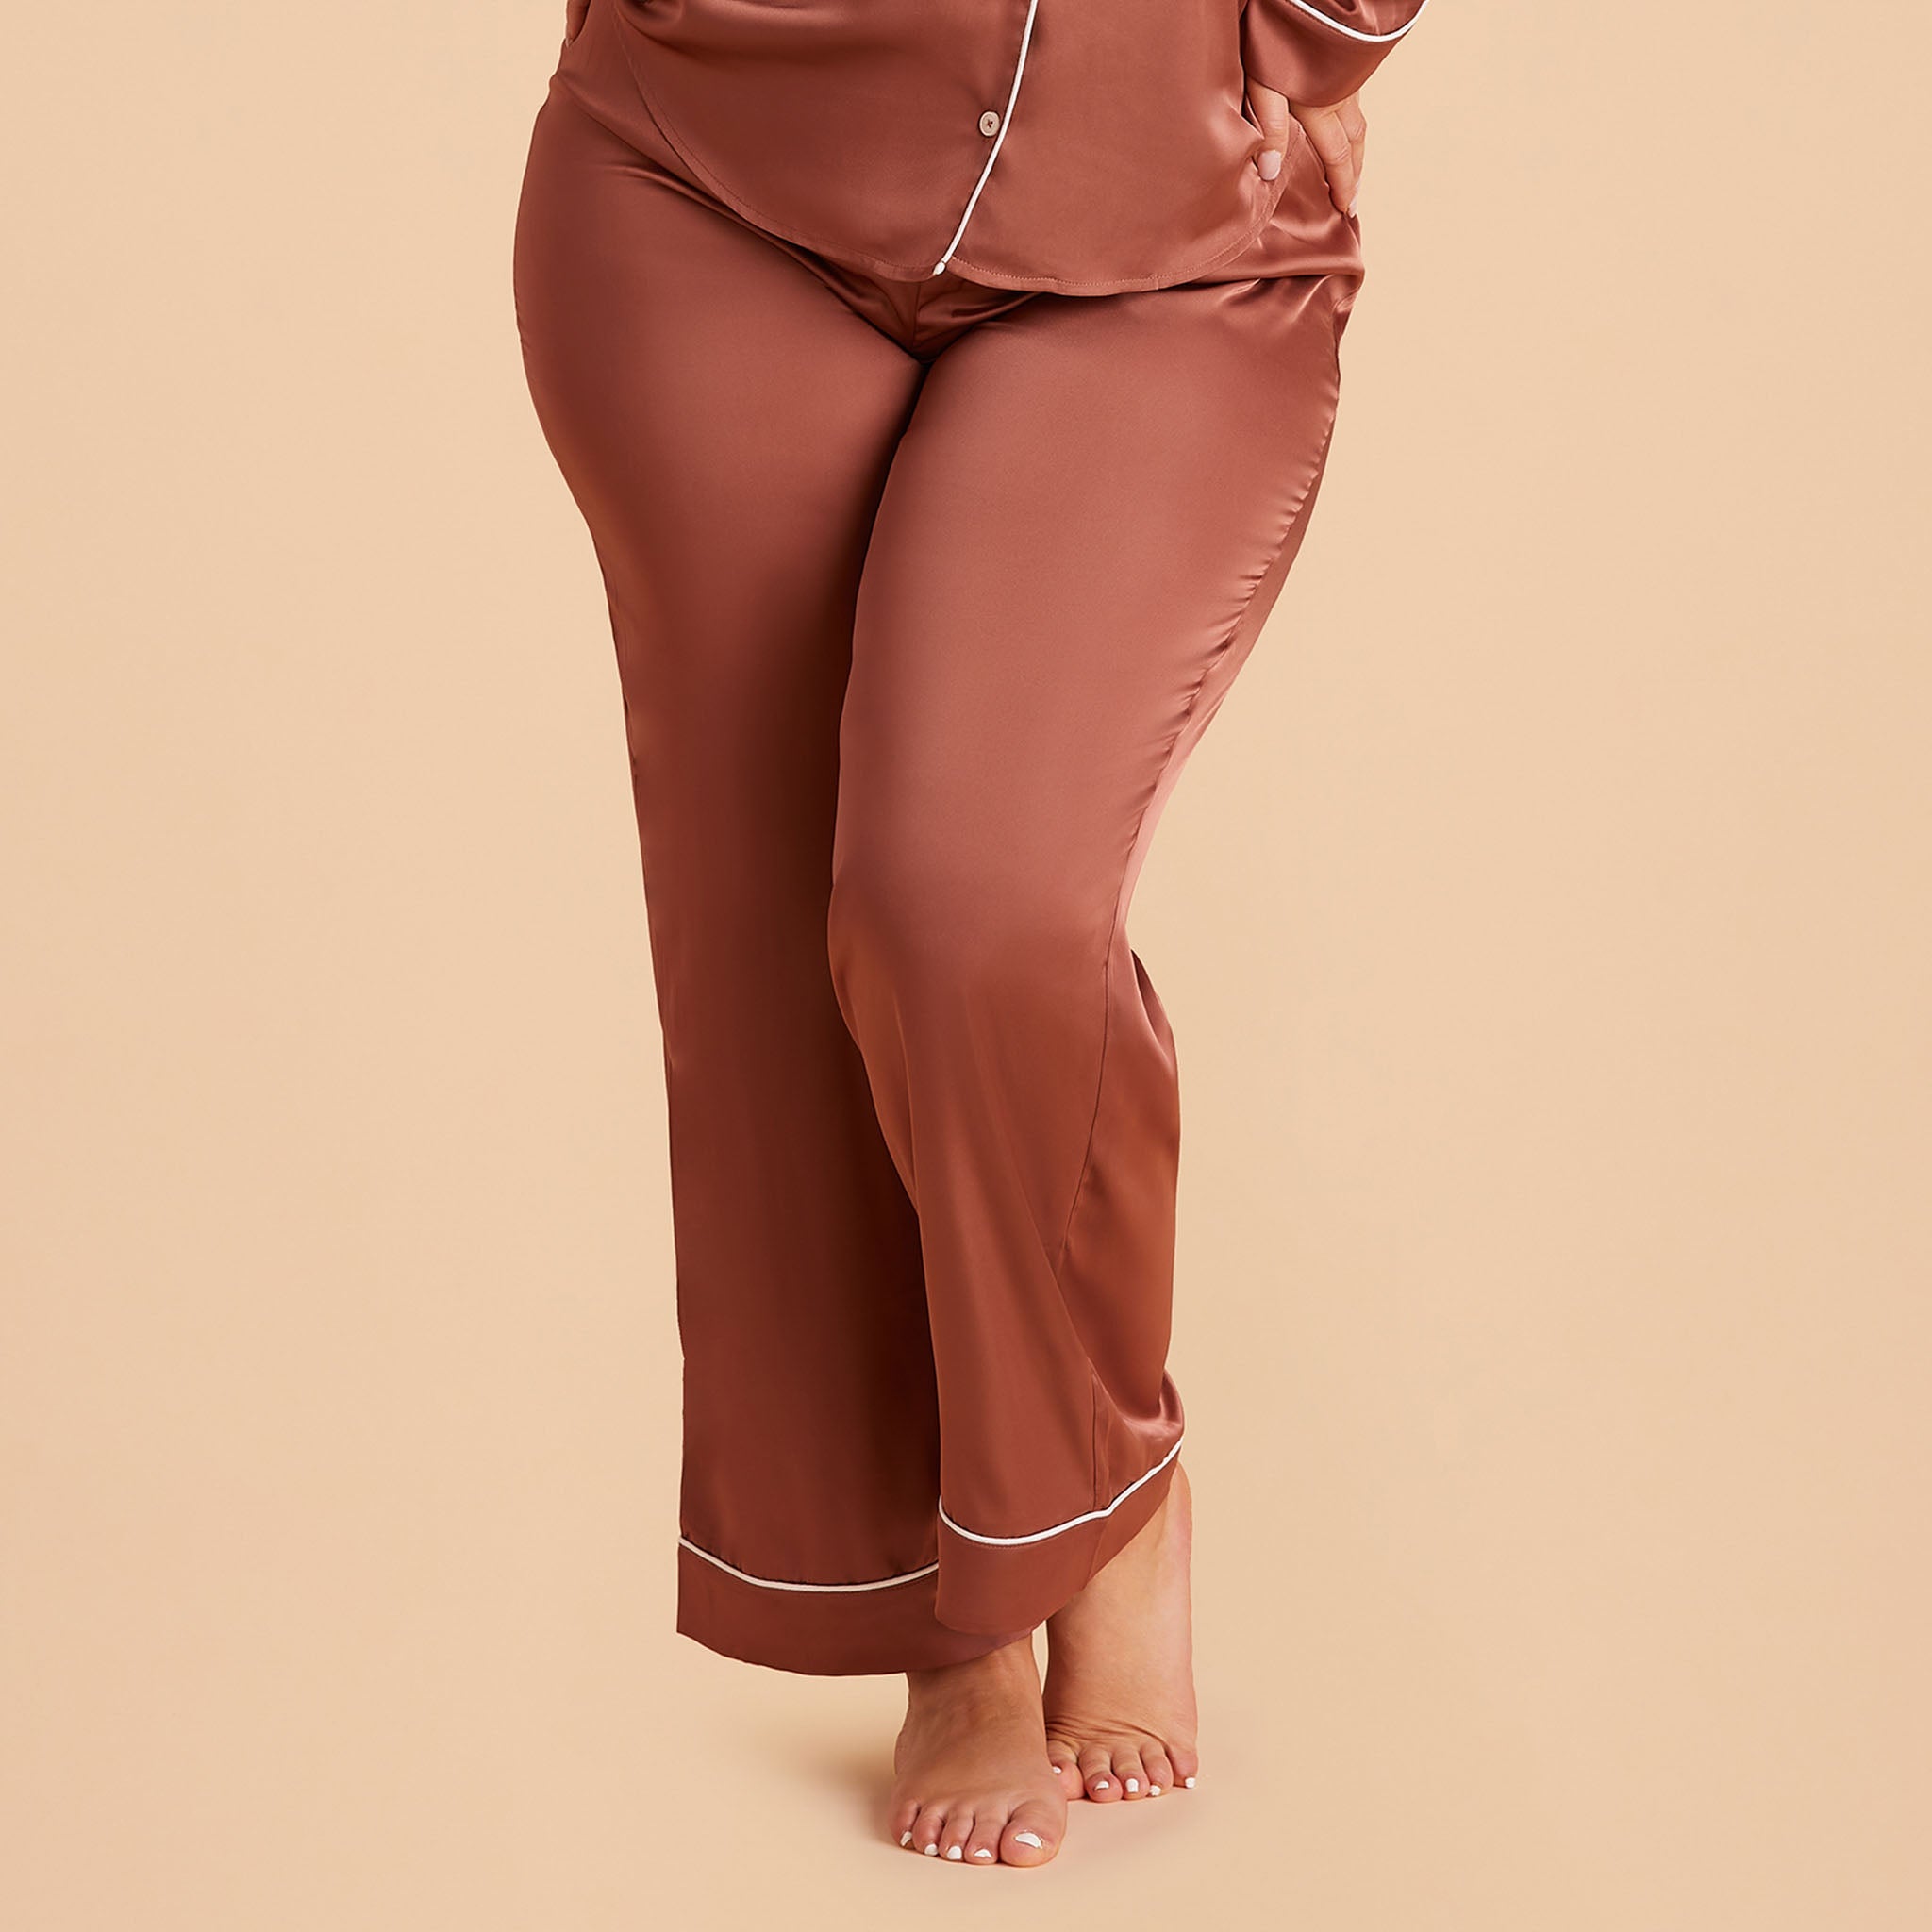 Jonny Plus Size Satin Pants Bridesmaid Pajamas With White Piping in Desert Rose, front view